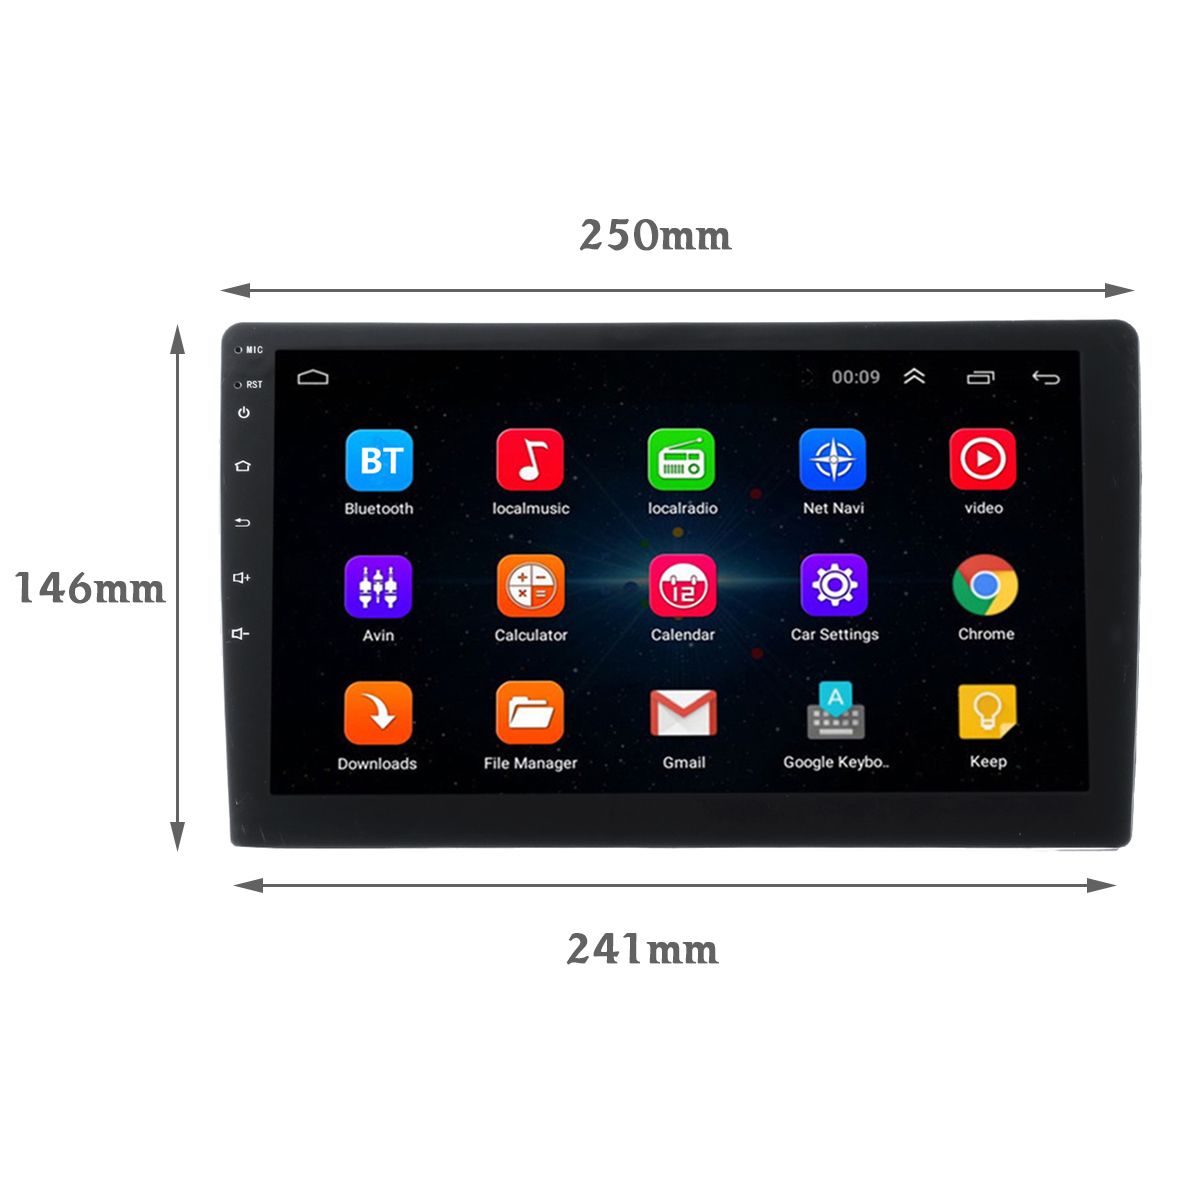 101-Inch-2-DIN-For-Android-80-Car-Stereo-Radio-25D-Touch-Screen-4-Core-2G32G-Screen-WIFI-GPS-Navigat-1432315